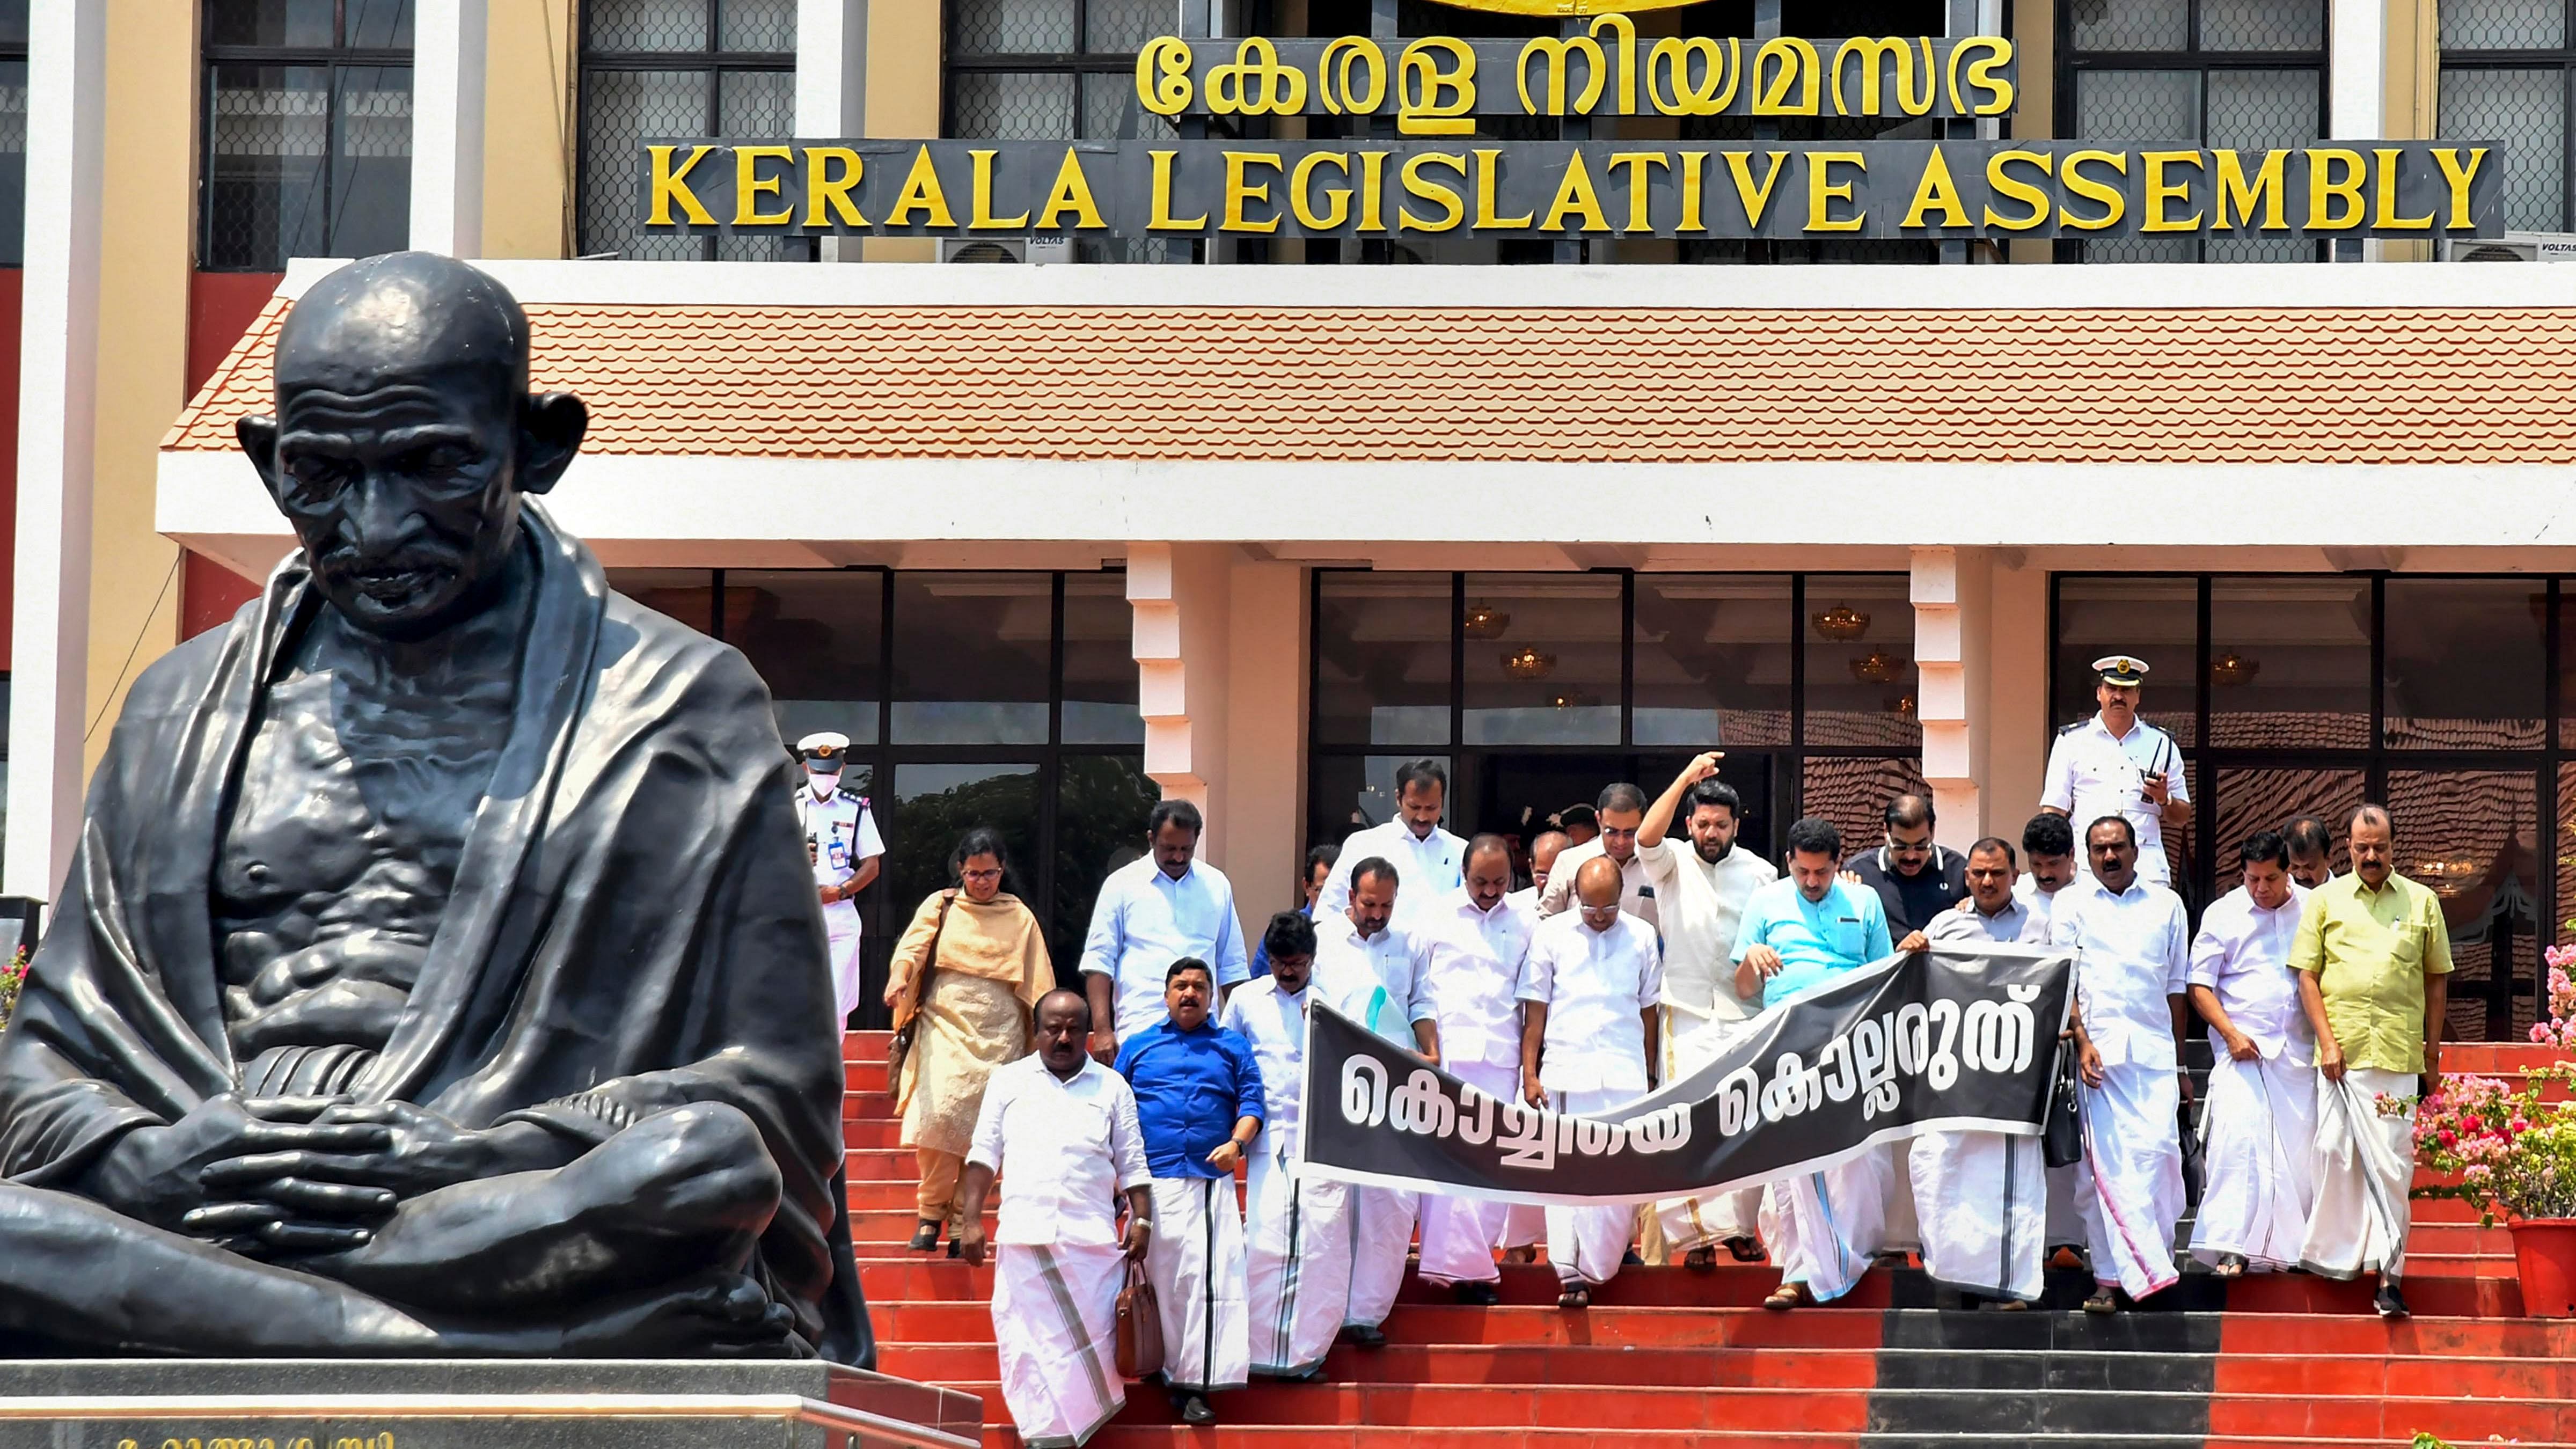 Opposition MLAs led by Leader of the Opposition VD Satheesan stage a walkout from the Kerala Legislative Assembly protesting against the fire at Brahmapuram Waste Treatment Plant, in Thiruvananthapuram, Tuesday, March 14. Credit: PTI Photo